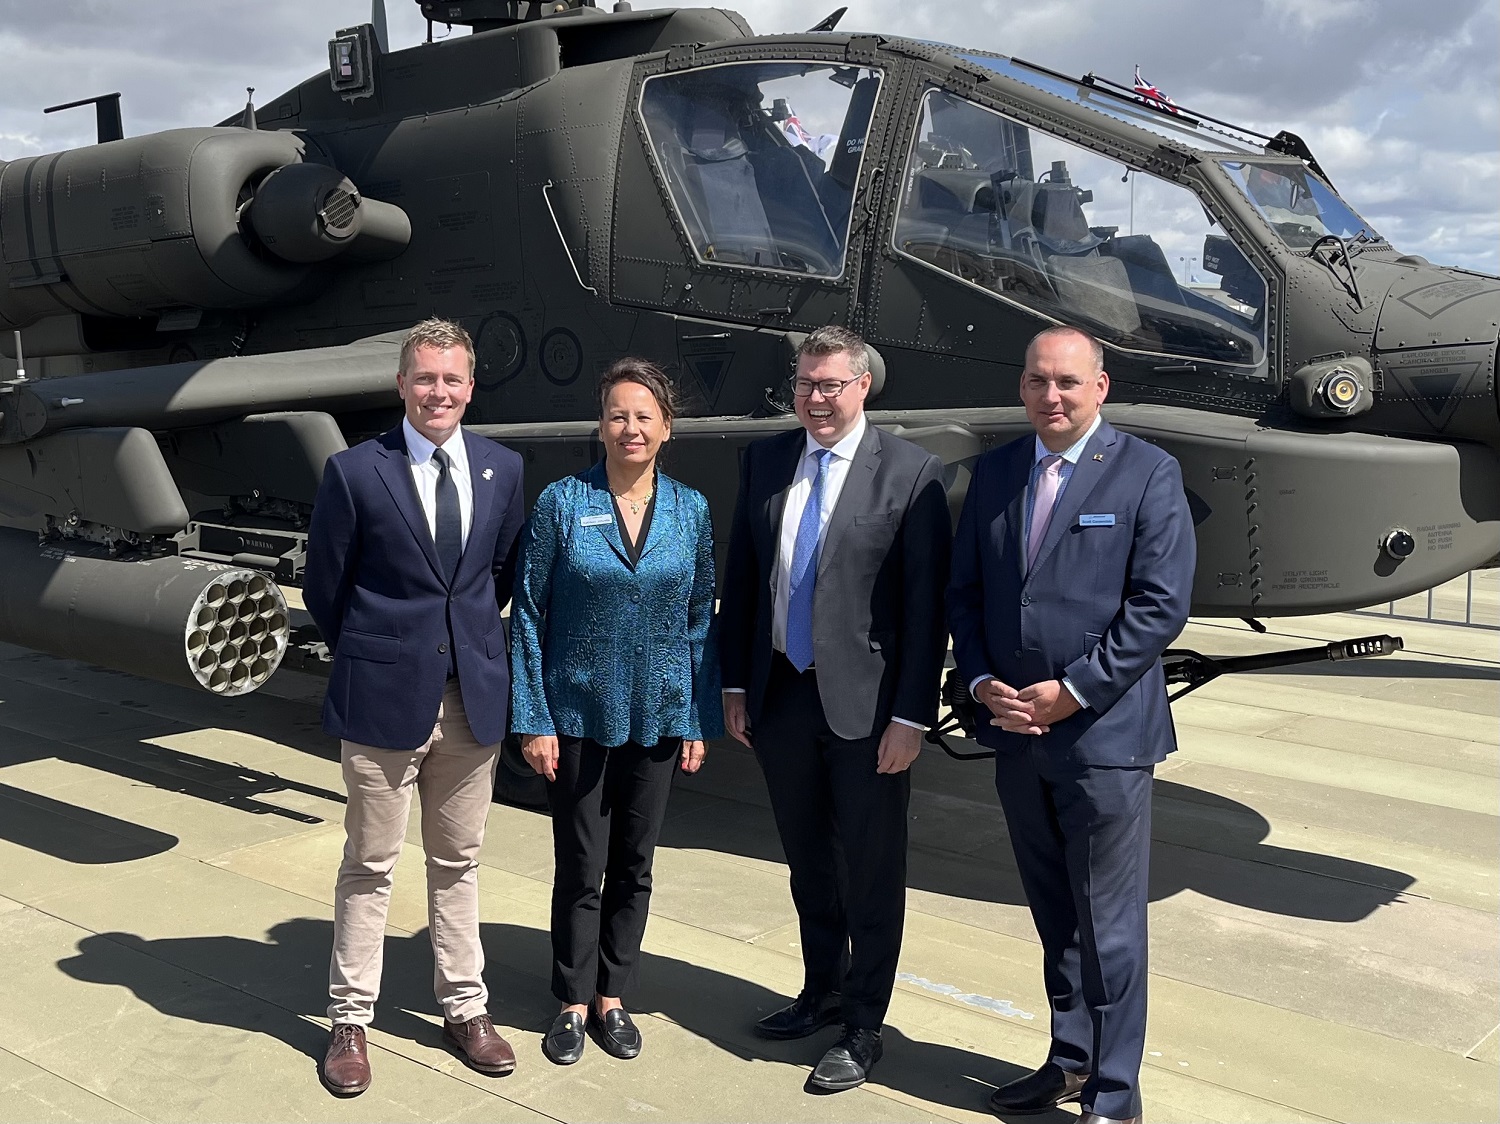 Thomas Global Systems Awarded Avionics Supply Contract for Boeing AH-64E Apache